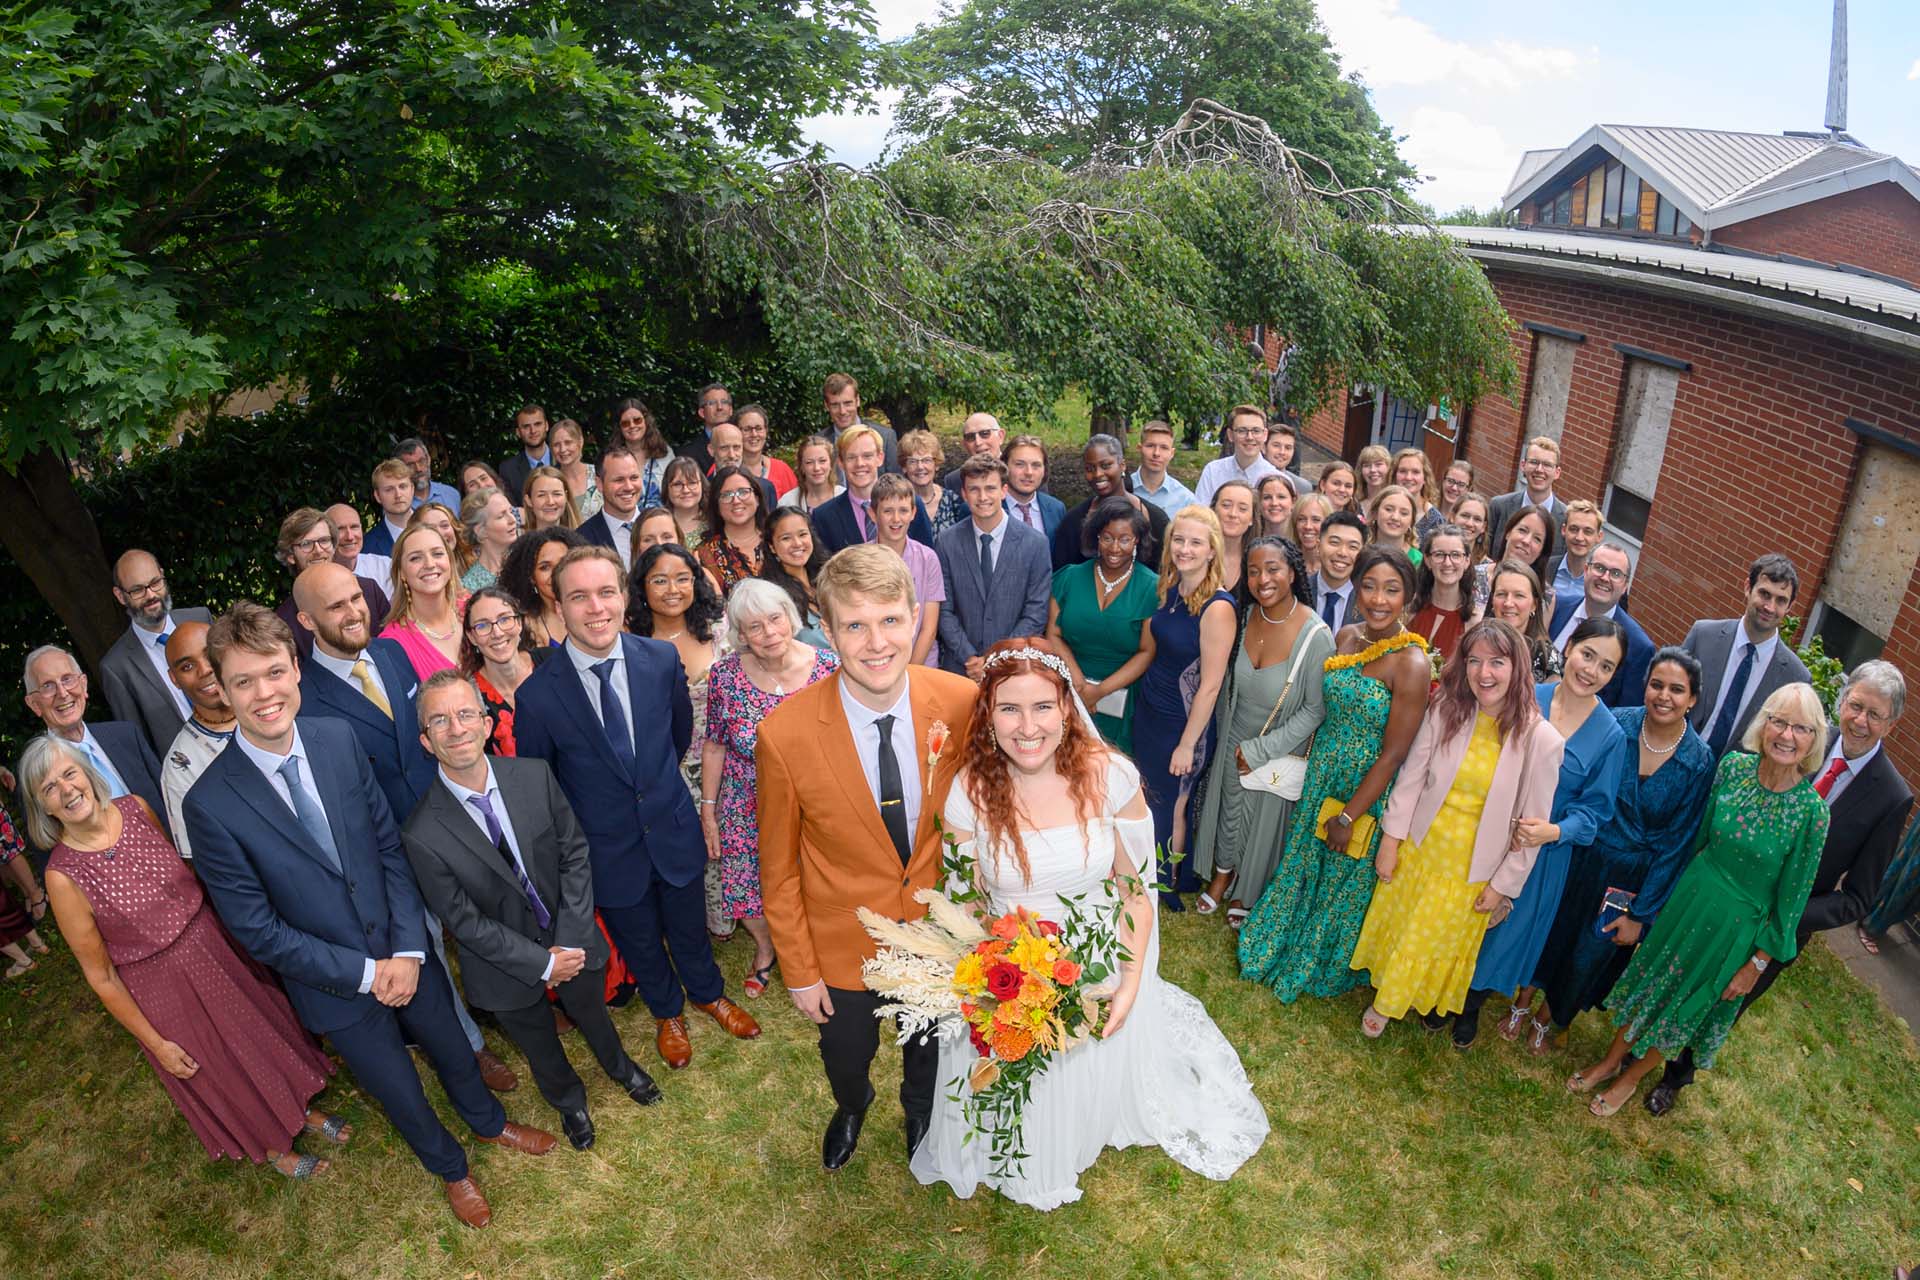 Coventry Warwickshire wedding Kent wedding photography based in Bromley South London 154330